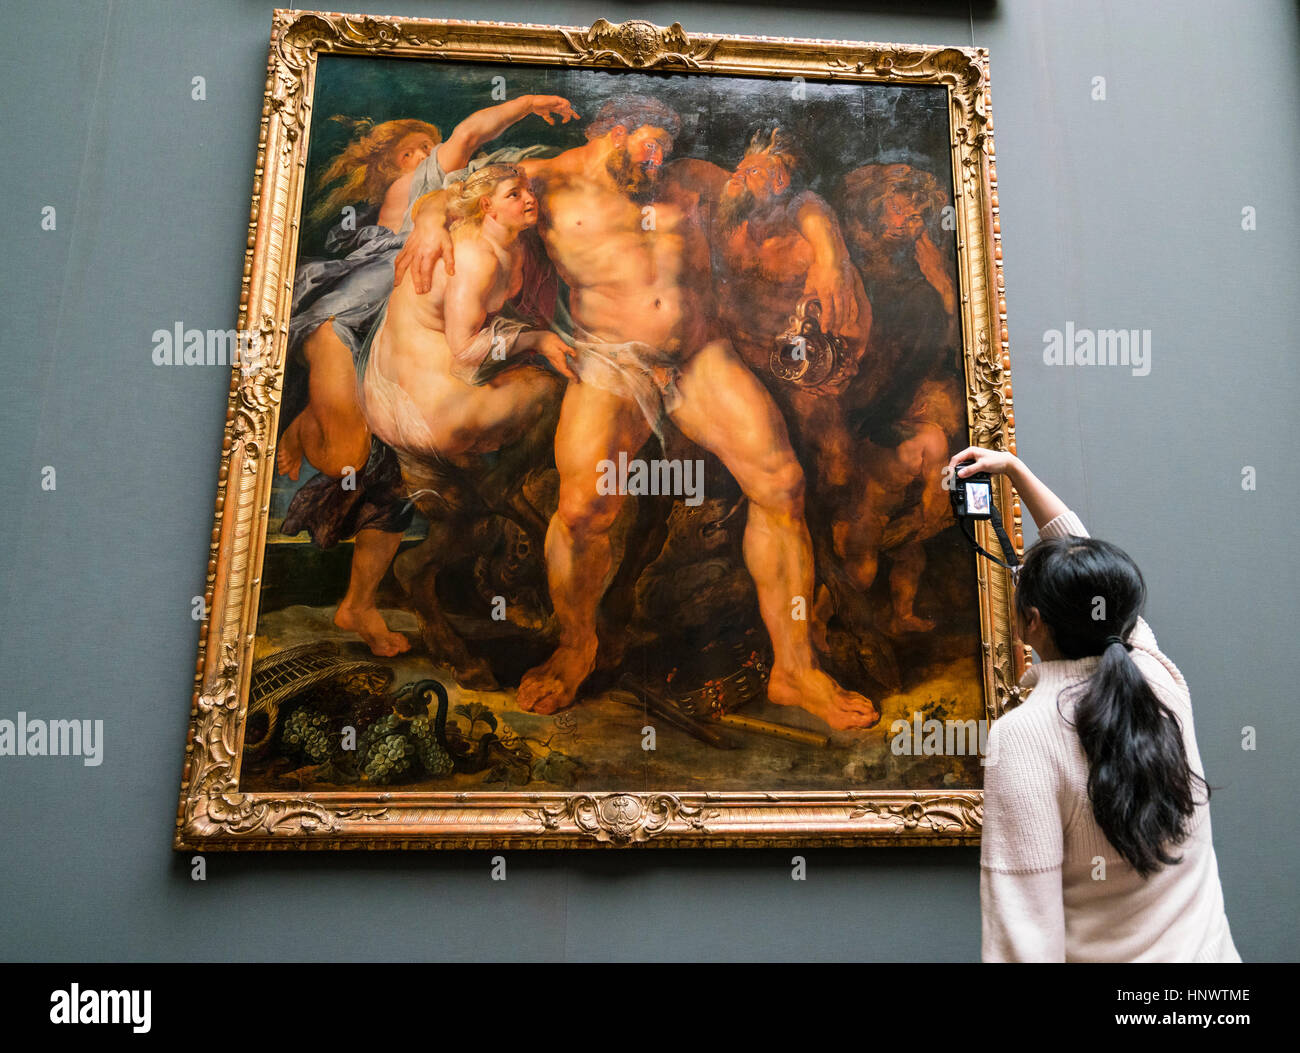 Woman photographing painting 'The Drunken Hercules being Led by a Nymph' by Peter Paul Rubens at GemŠldegalerie Alte Meister or Zwinger Museum in Dres Stock Photo